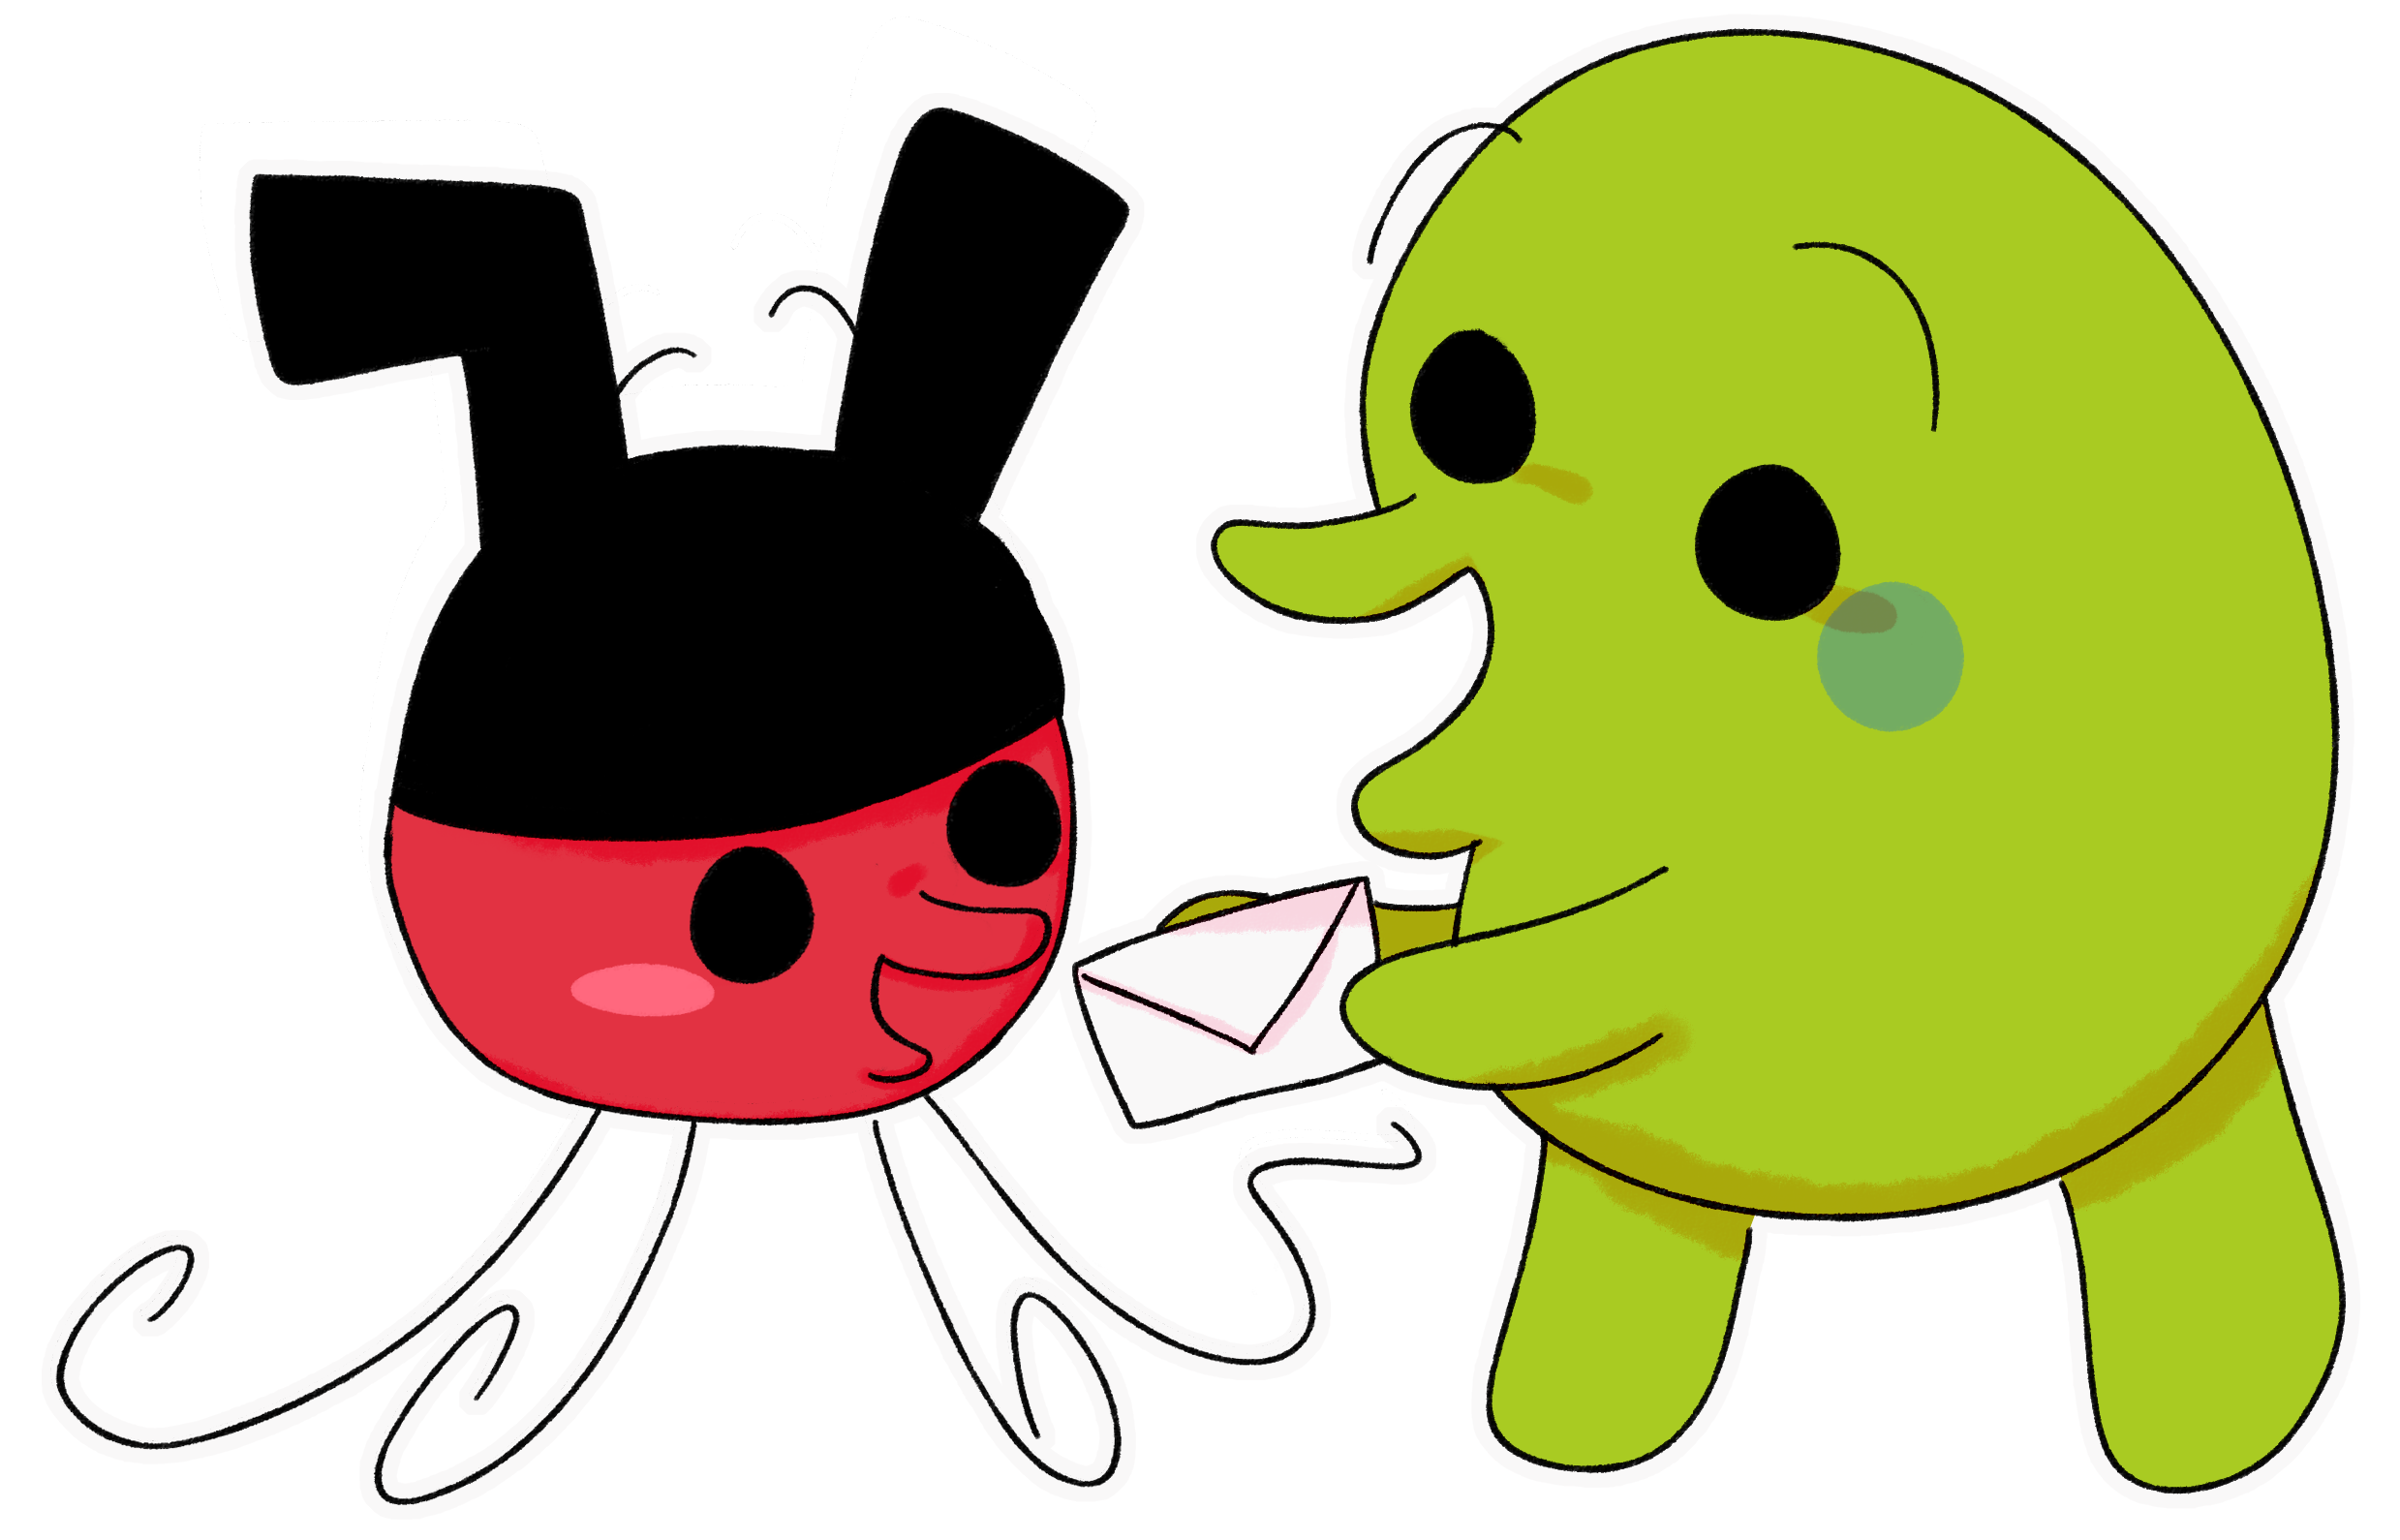 Artwork depicting the characters Takotchi and Kuchipatchi excitedly admiring an envelope.